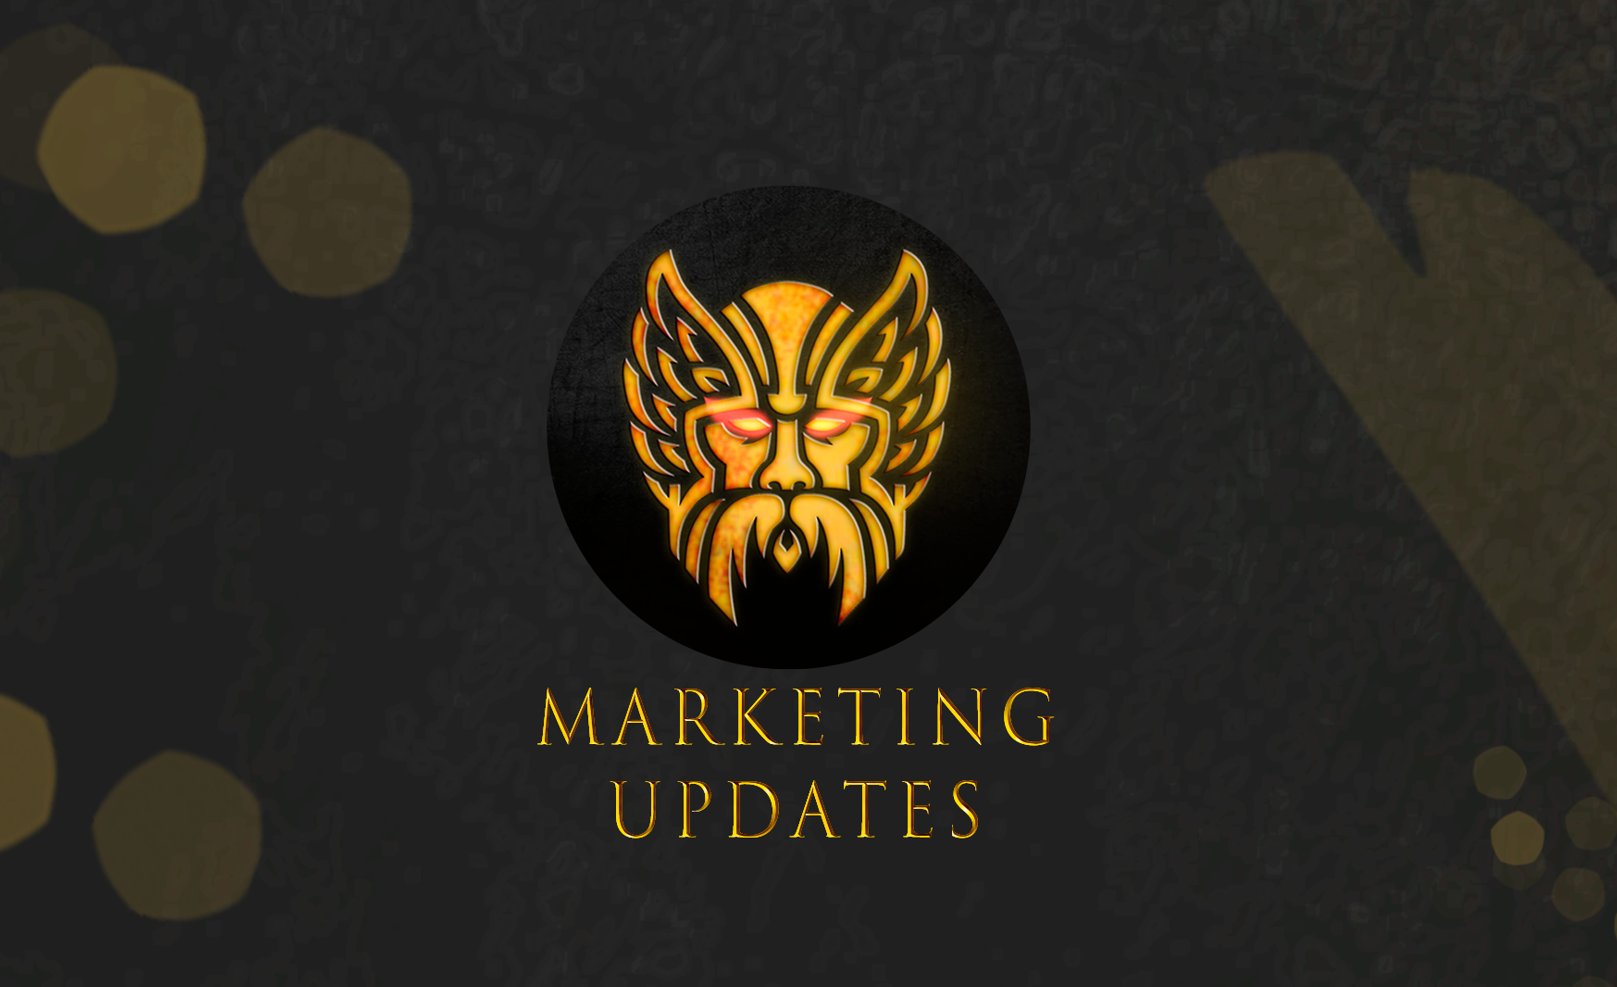 @ragnarok.game/marketing-update-or-landing-page-duat-claim-stats-and-brand-guidelines